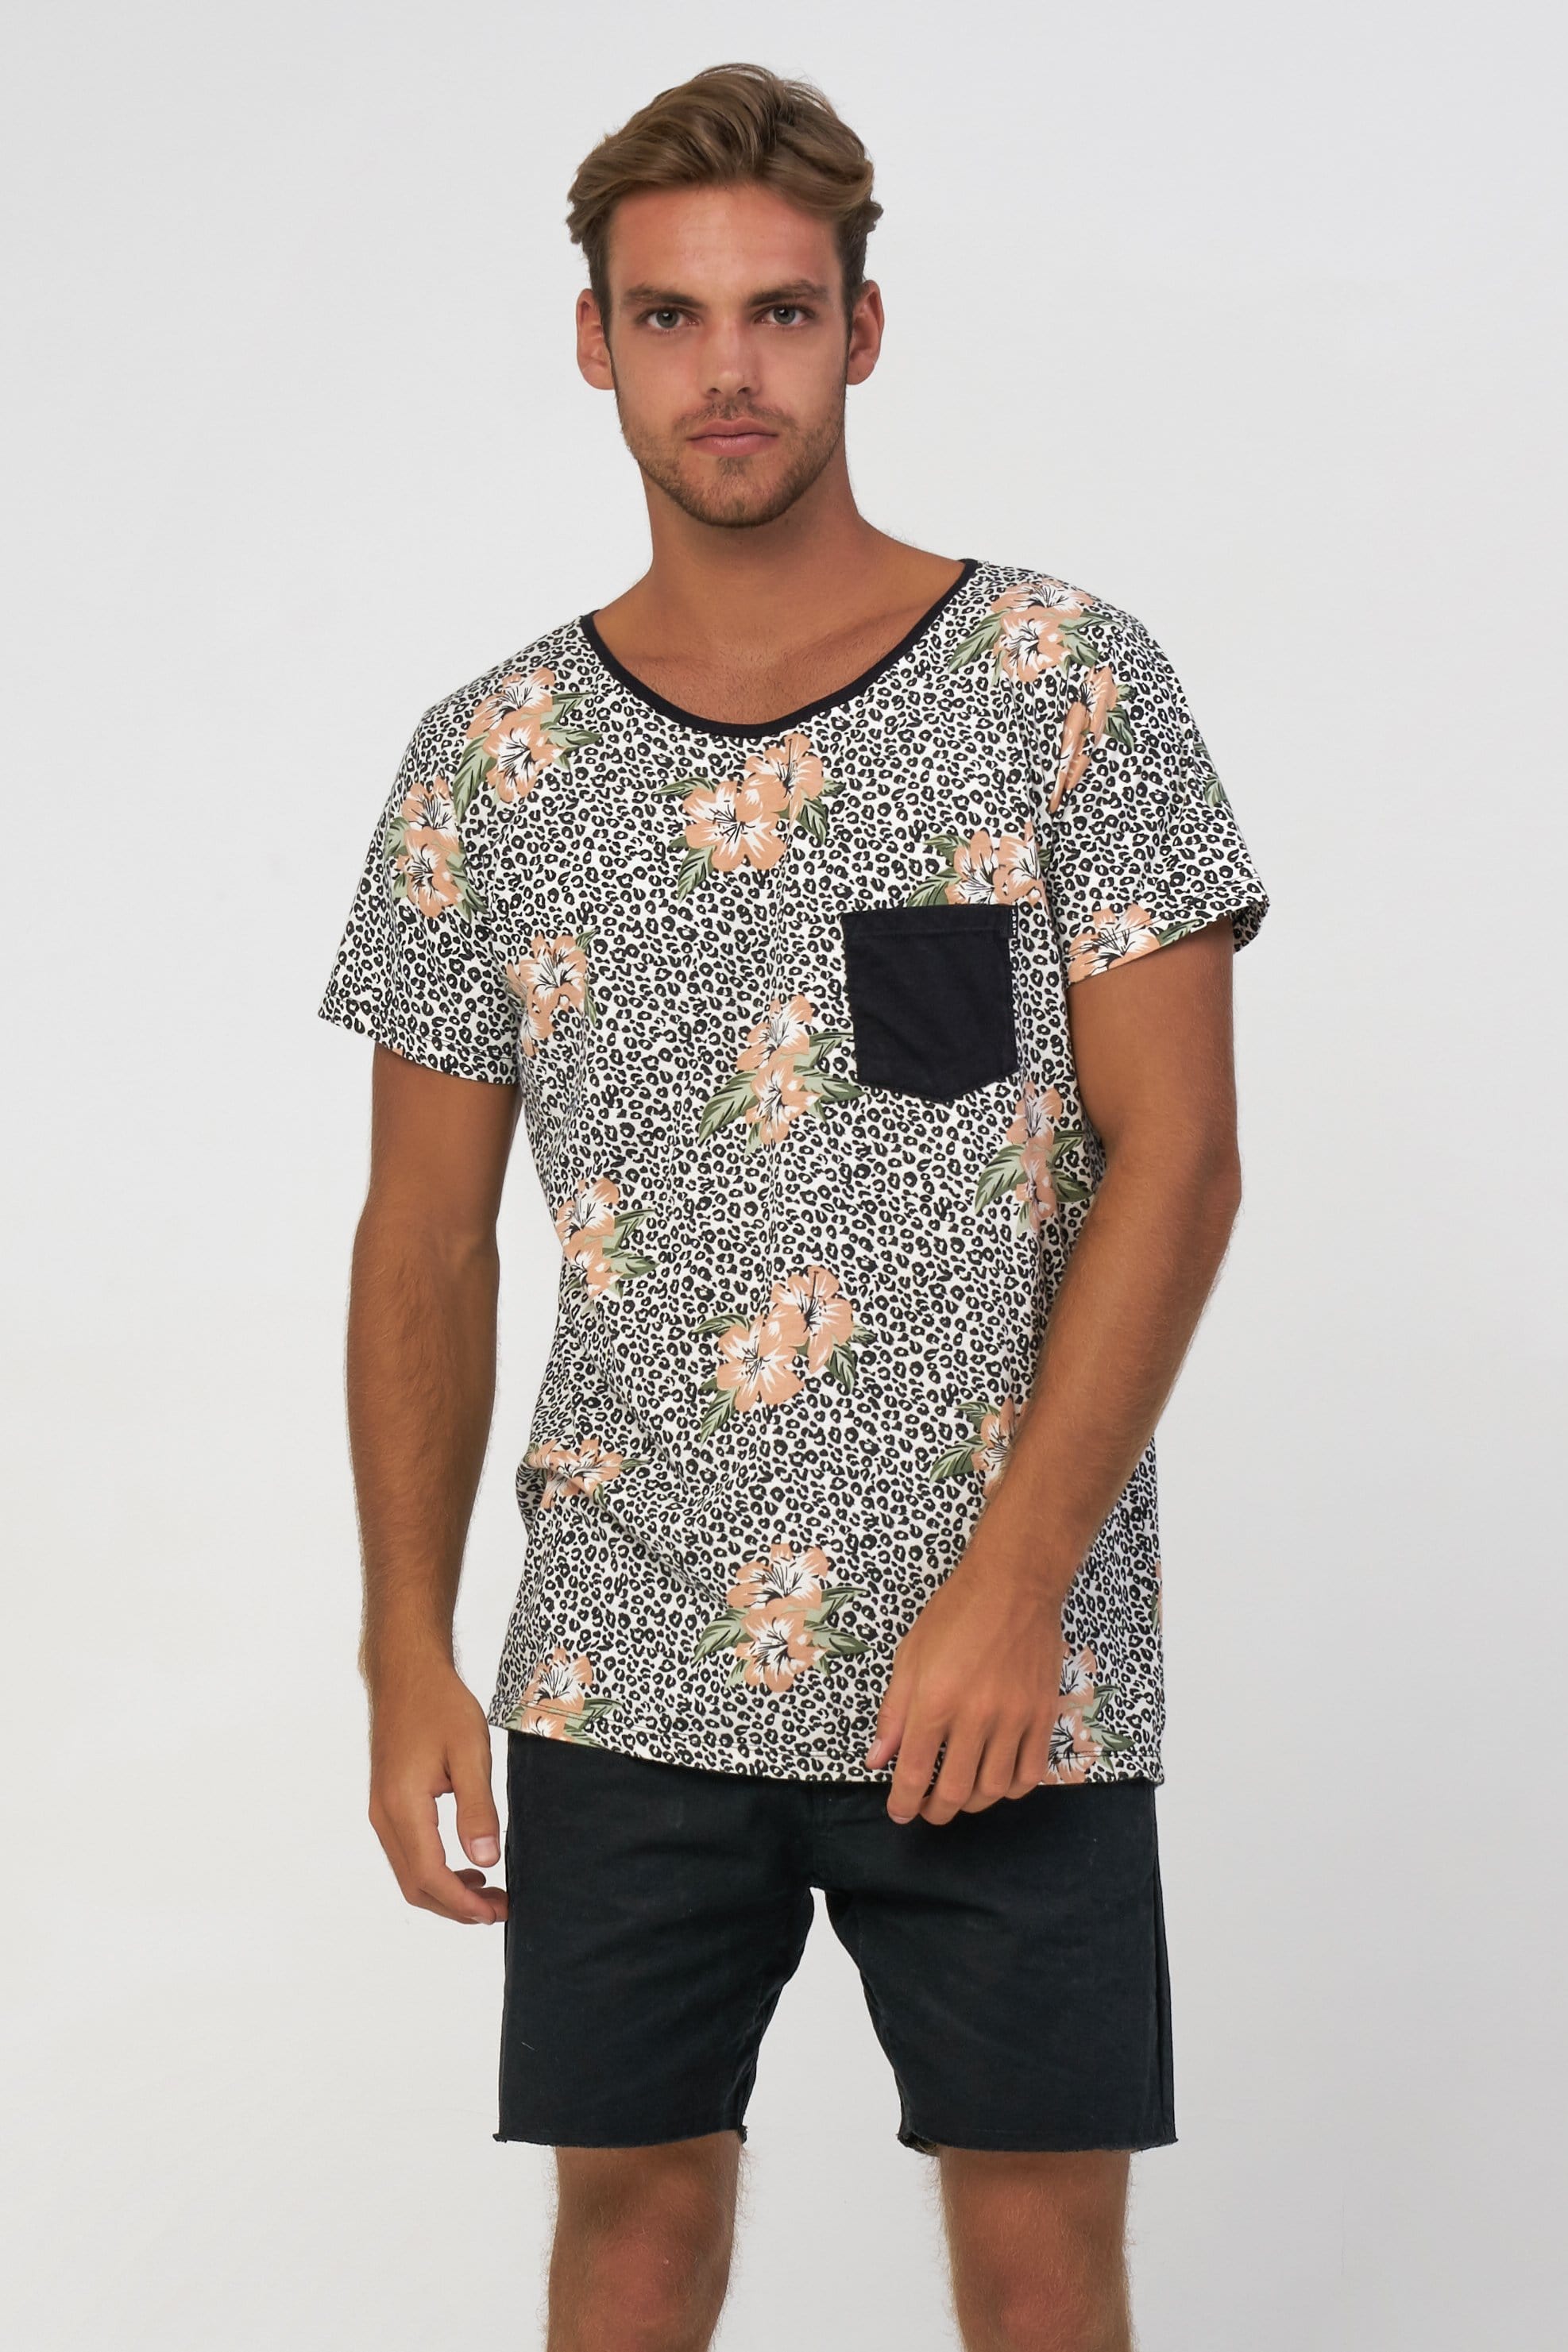 Leo Tee - Man T-Shirt - LOST IN PARADISE